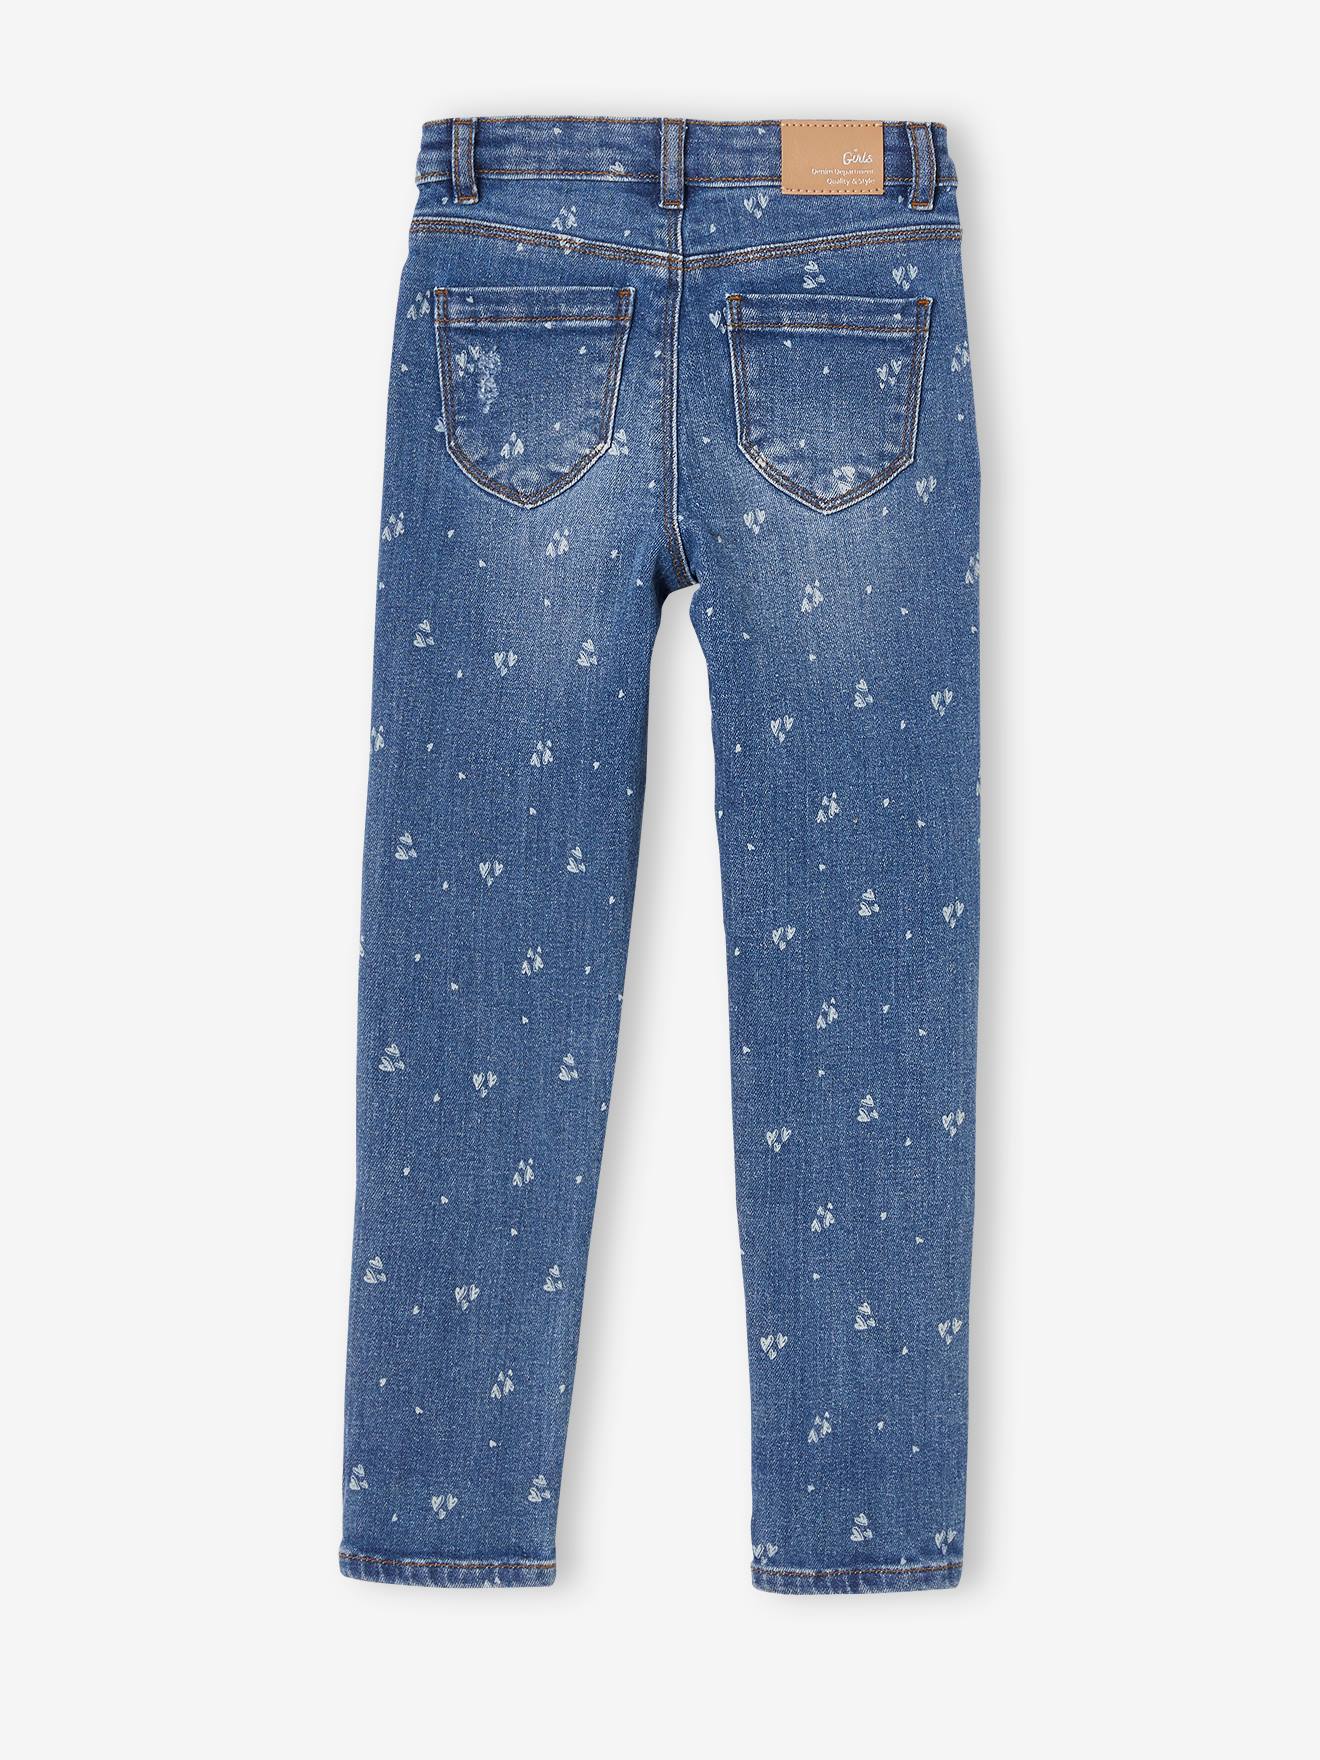 Straight Leg Jeans with Distressed Details for Girls - blue medium wasched